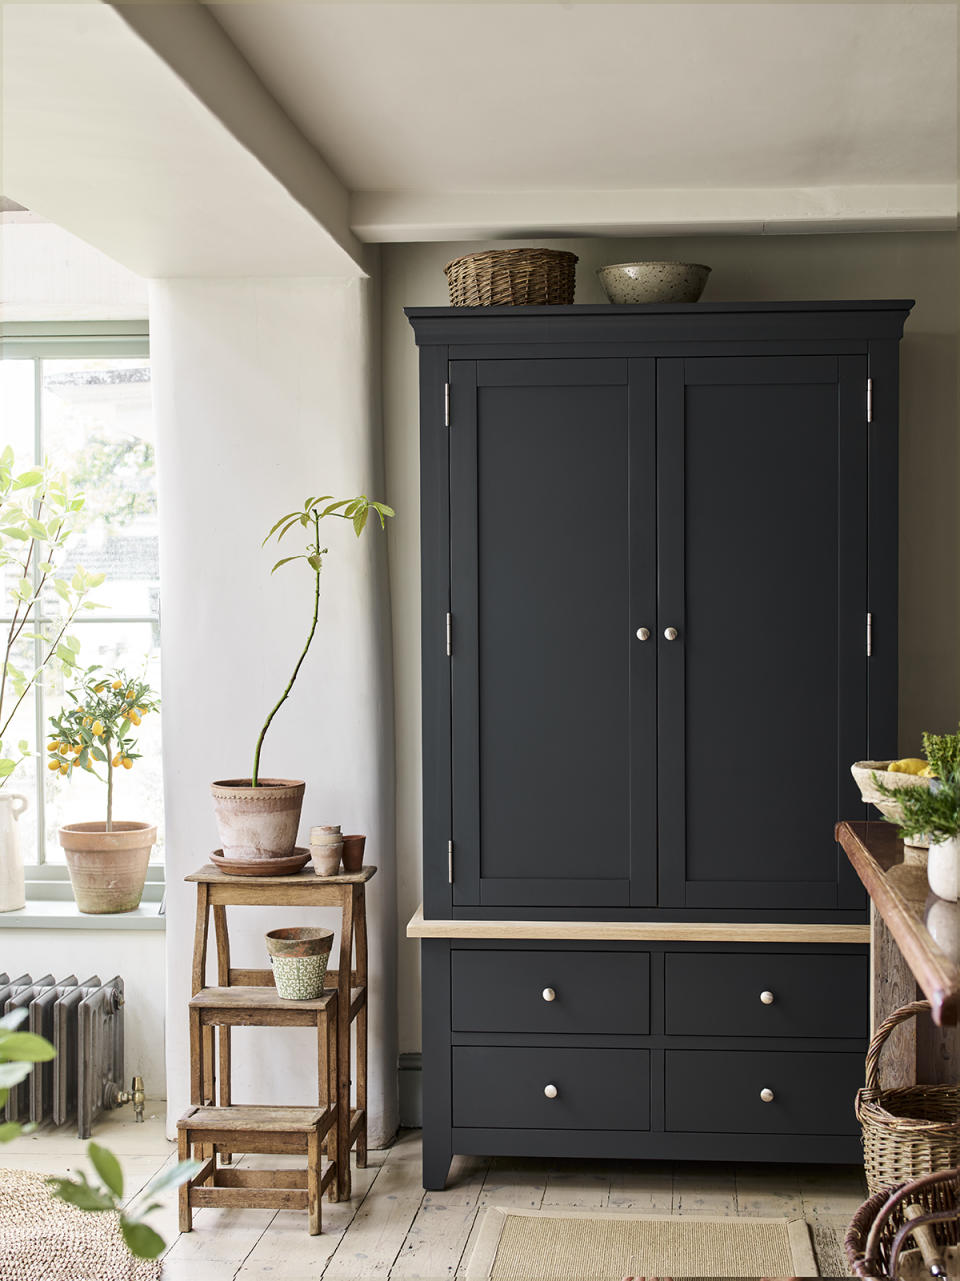 Create a farmhouse feel with a freestanding pantry